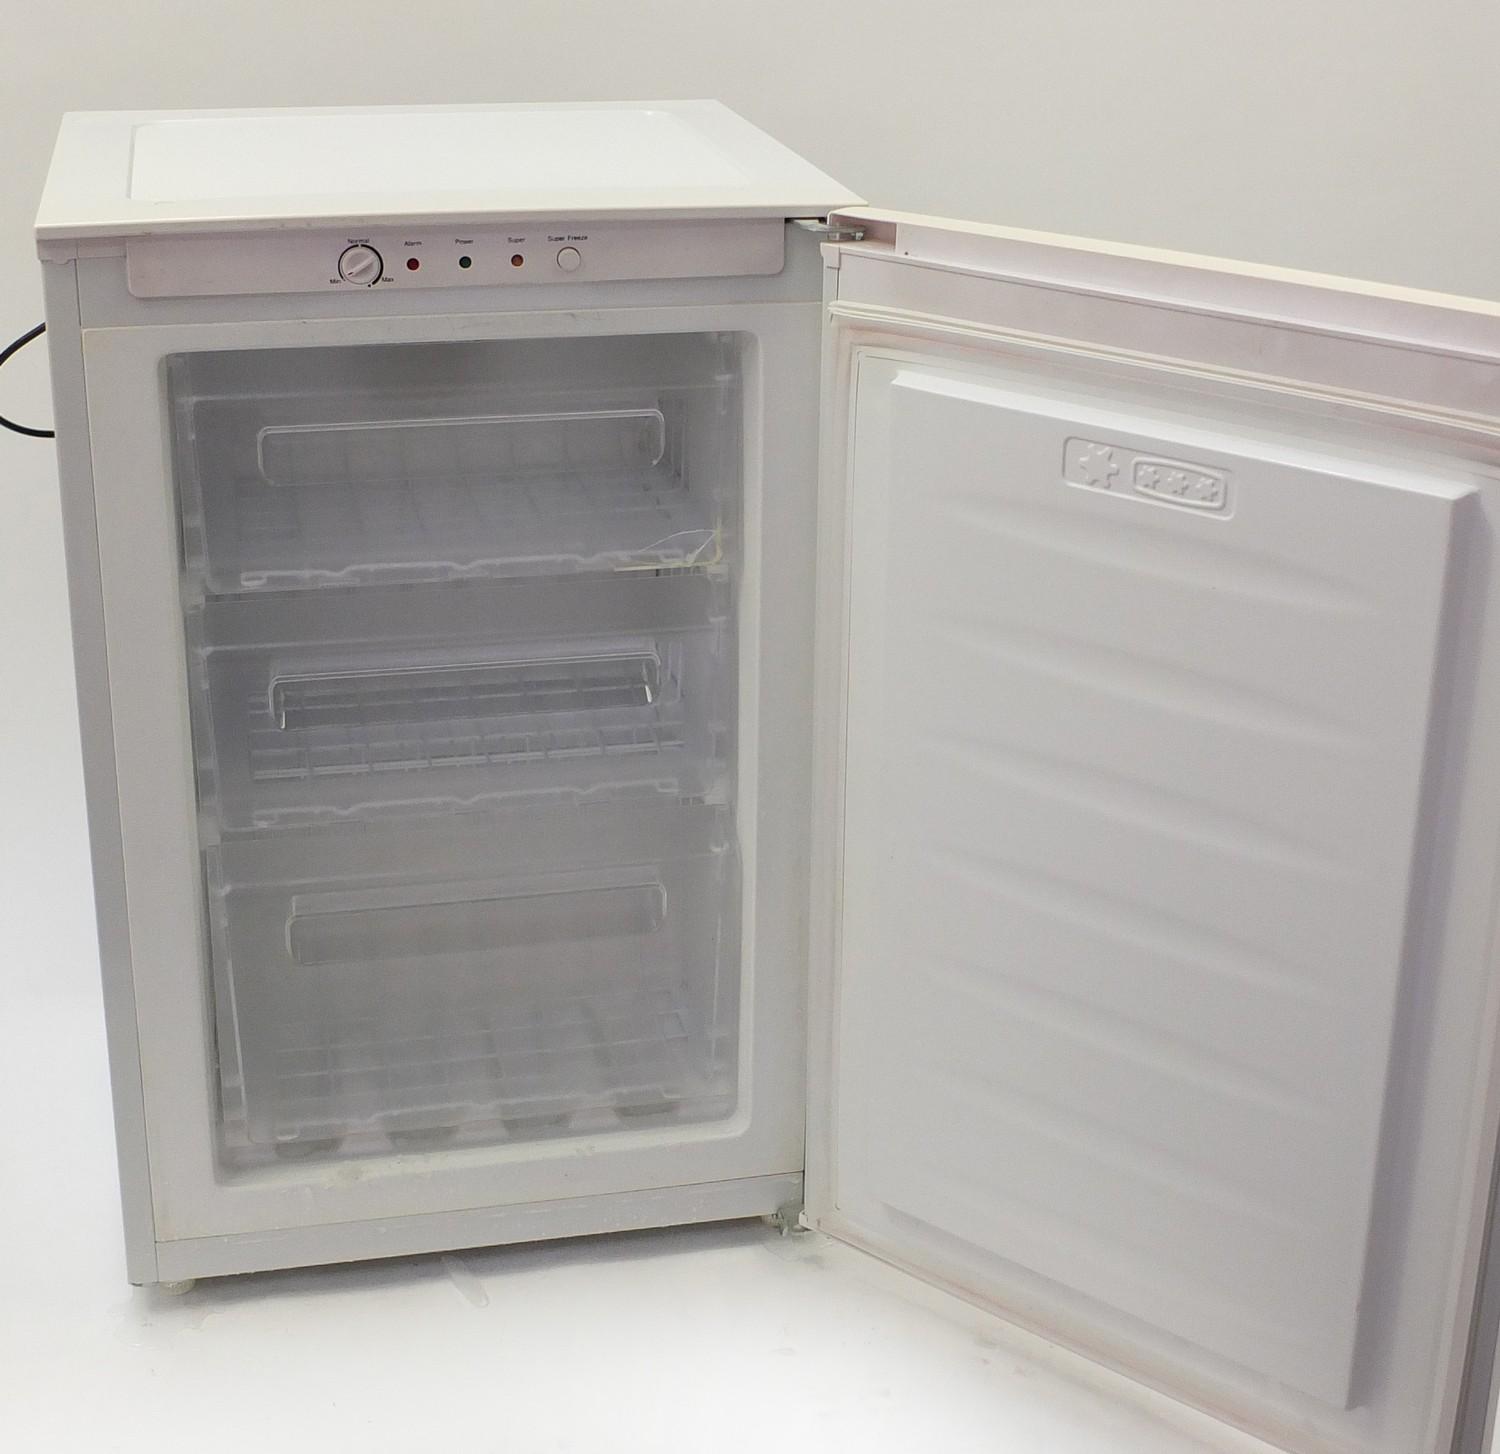 Frigidaire A class frost free freezer, 85cm H x 56cm W x 55cm D : For Further Condition Reports - Image 3 of 5